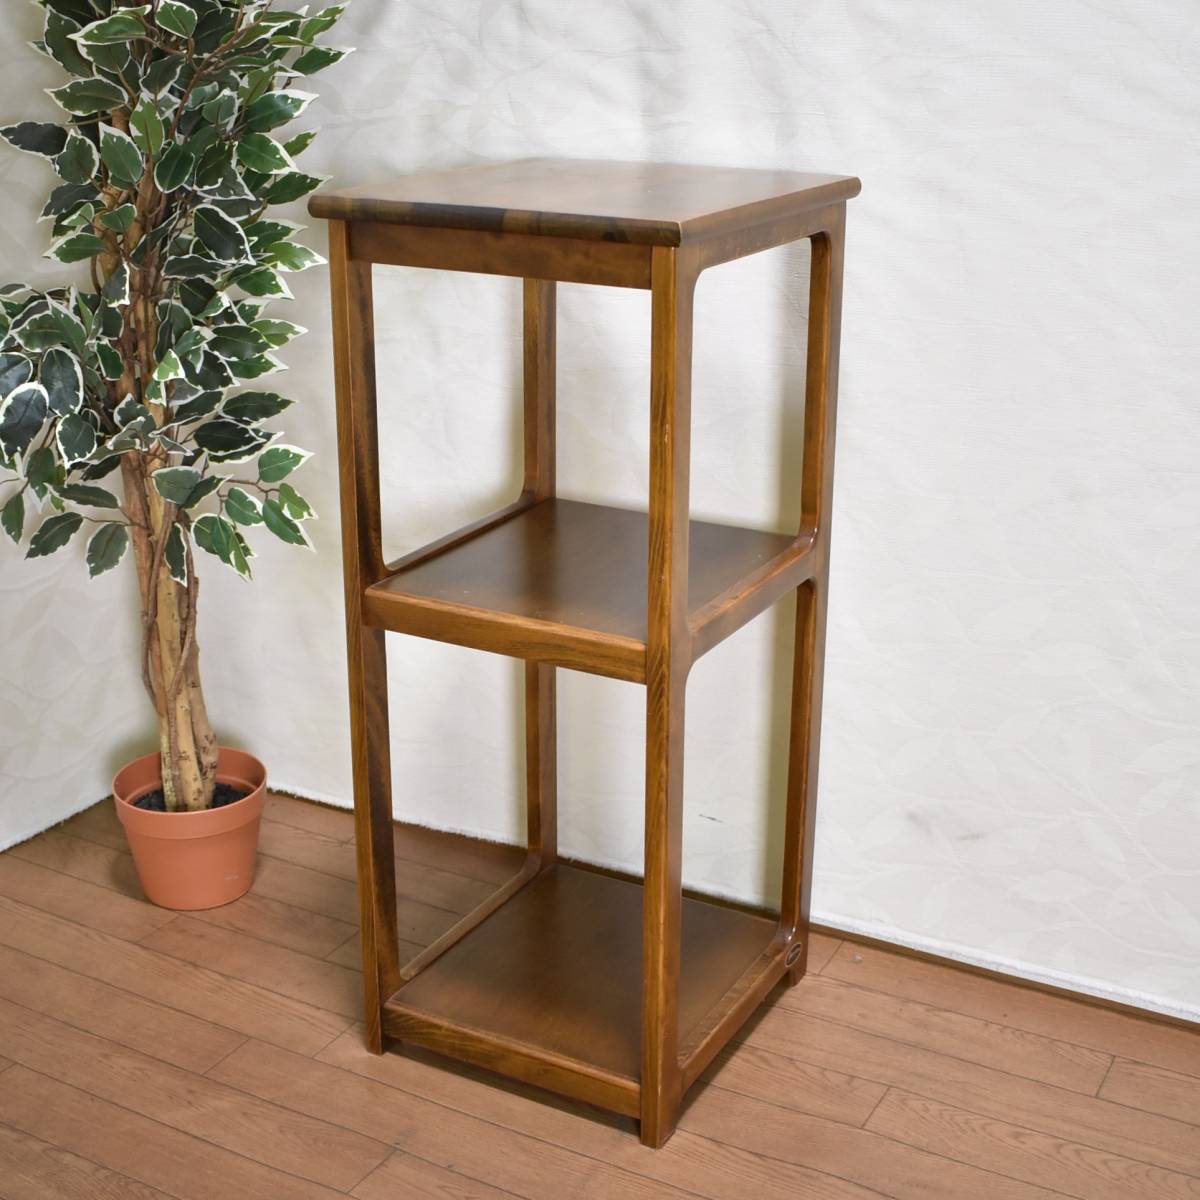  wooden 3 step rack width 34cm depth 36cm height 81.5cm made in Japan telephone stand / stand for flower vase / shelf / side table / retro / interior [ pickup welcome ]yt940ji50501-03